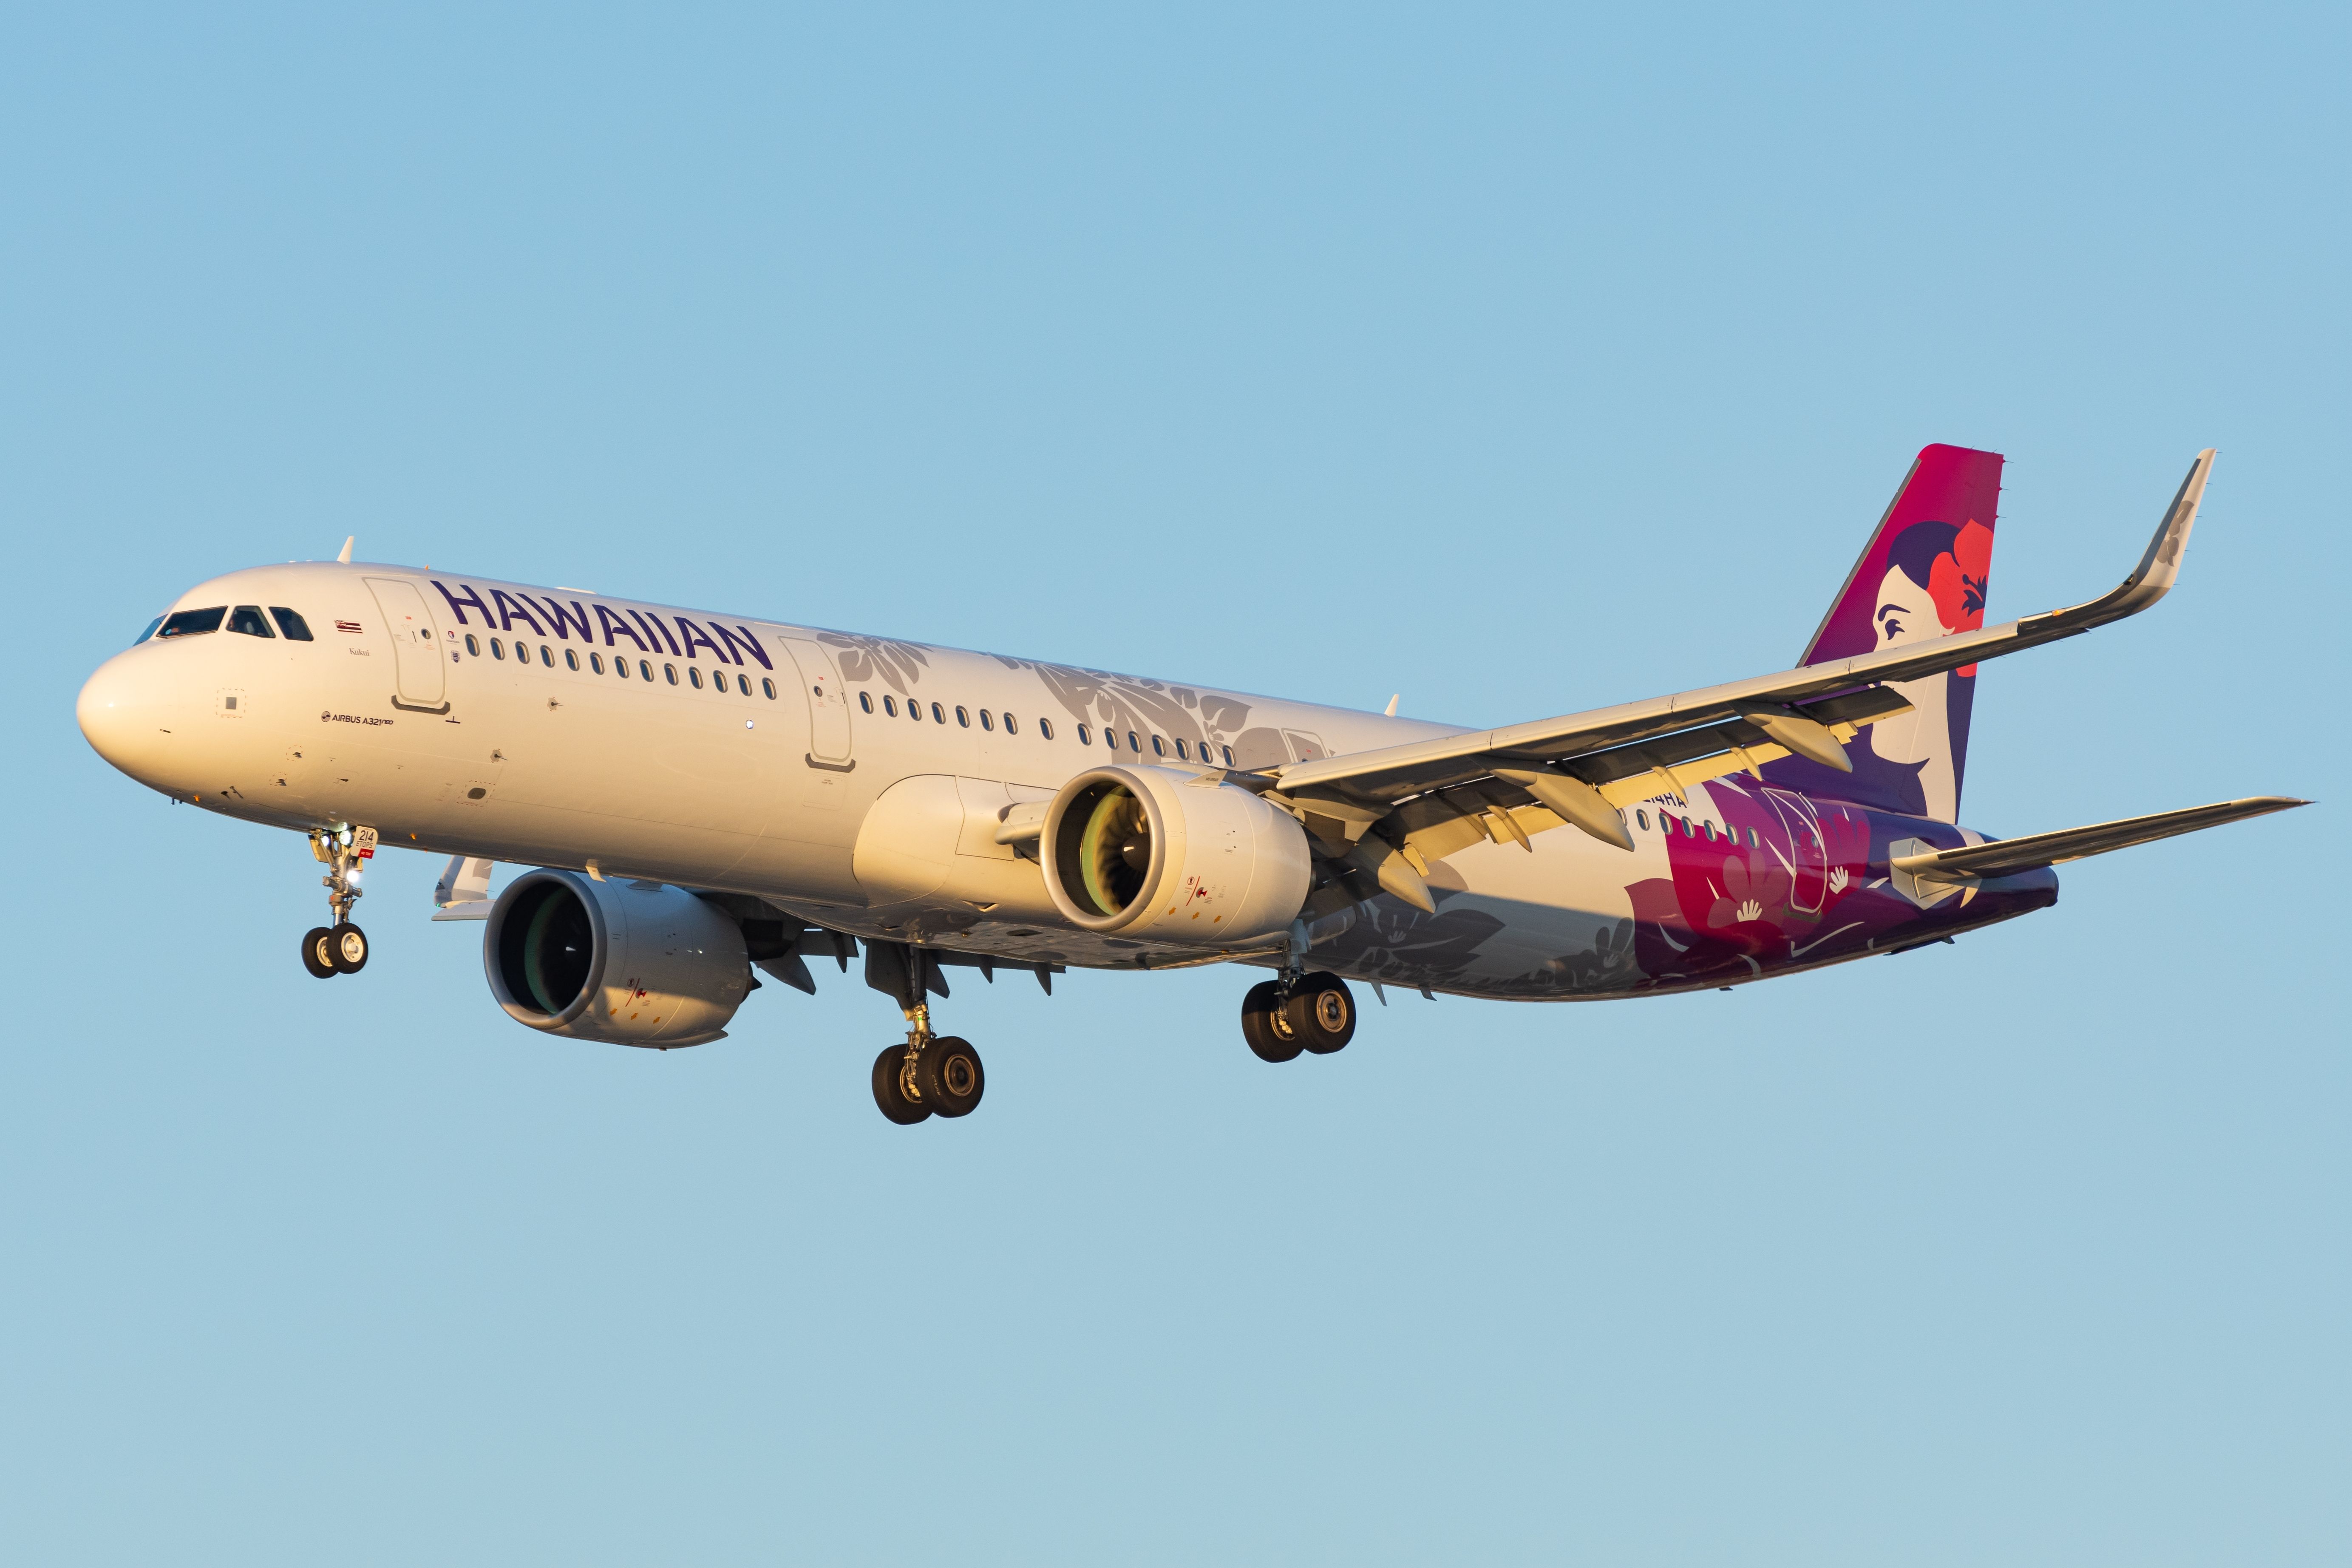 A Hawaiian Airlines Airbus A321neo flying in the sky.